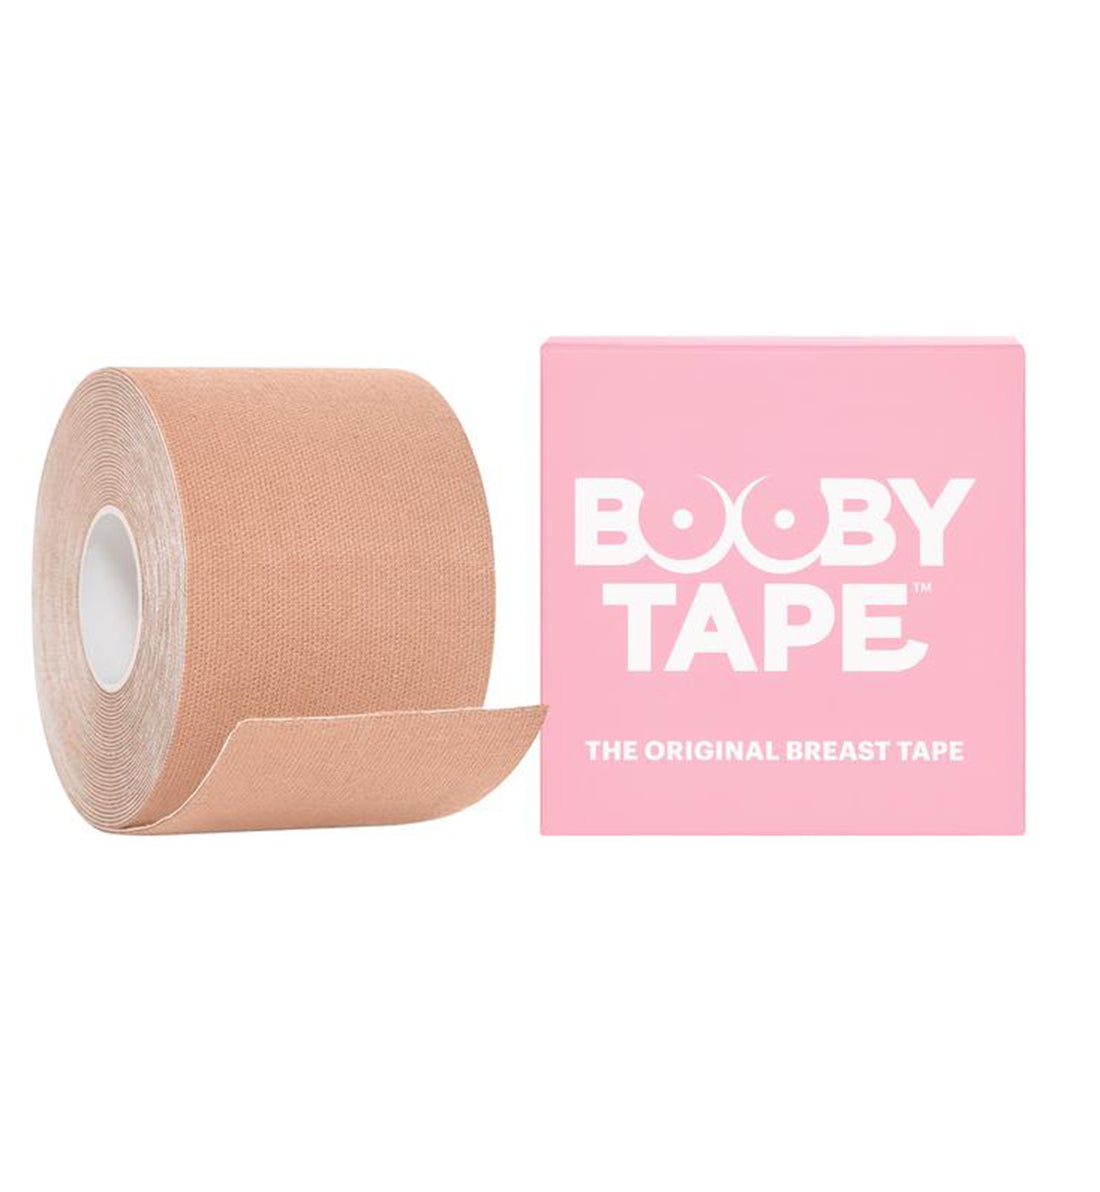 BOOBY TAPE The Original Breast Tape,5 m,Nude - Nude,One Size